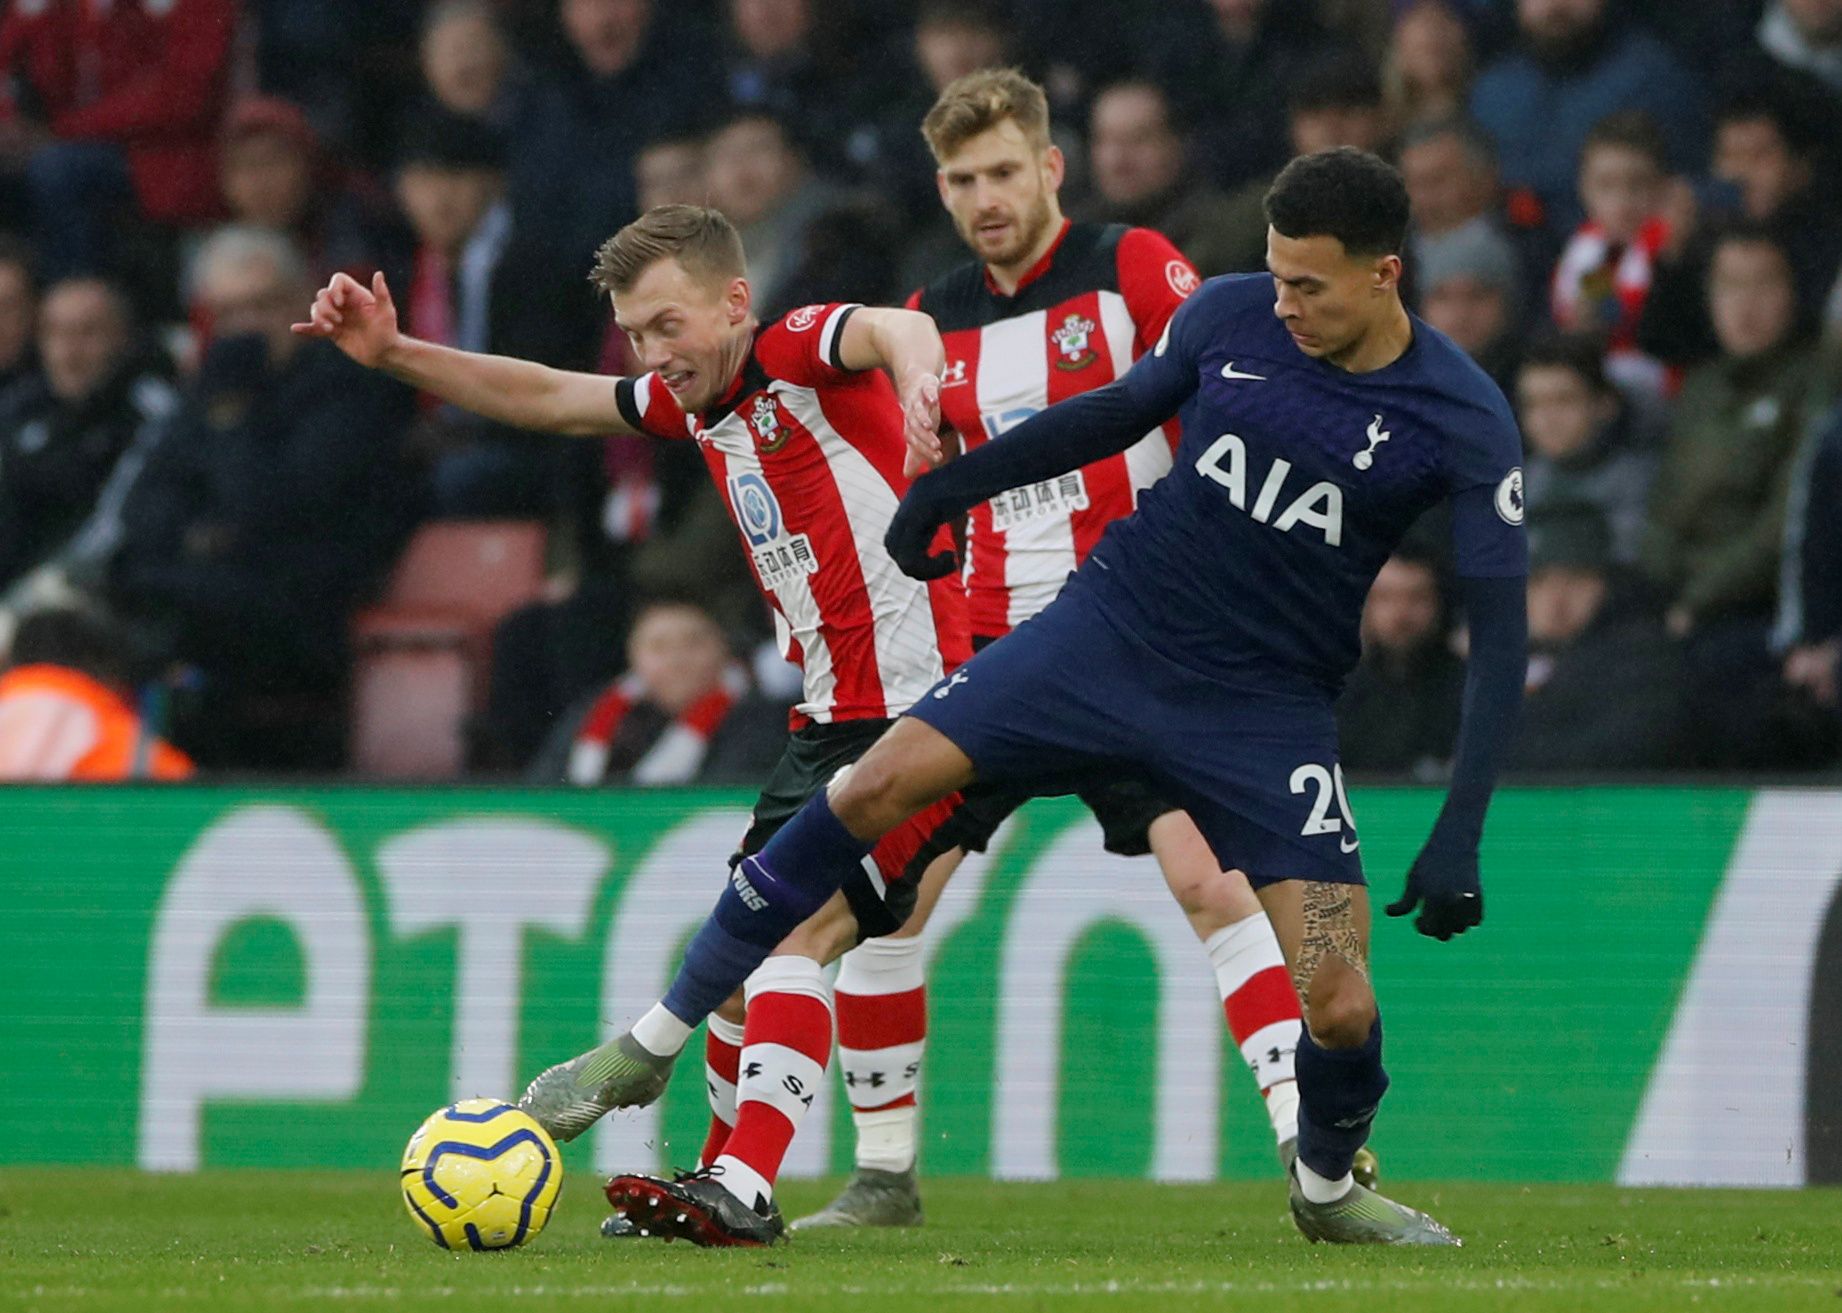 Soccer Football - Premier League - Southampton v Tottenham Hotspur - St Mary's Stadium, Southampton, Britain - January 1, 2020  Tottenham Hotspur's Dele Alli in action with Southampton's James Ward-Prowse     Action Images via Reuters/Paul Childs  EDITORIAL USE ONLY. No use with unauthorized audio, video, data, fixture lists, club/league logos or 